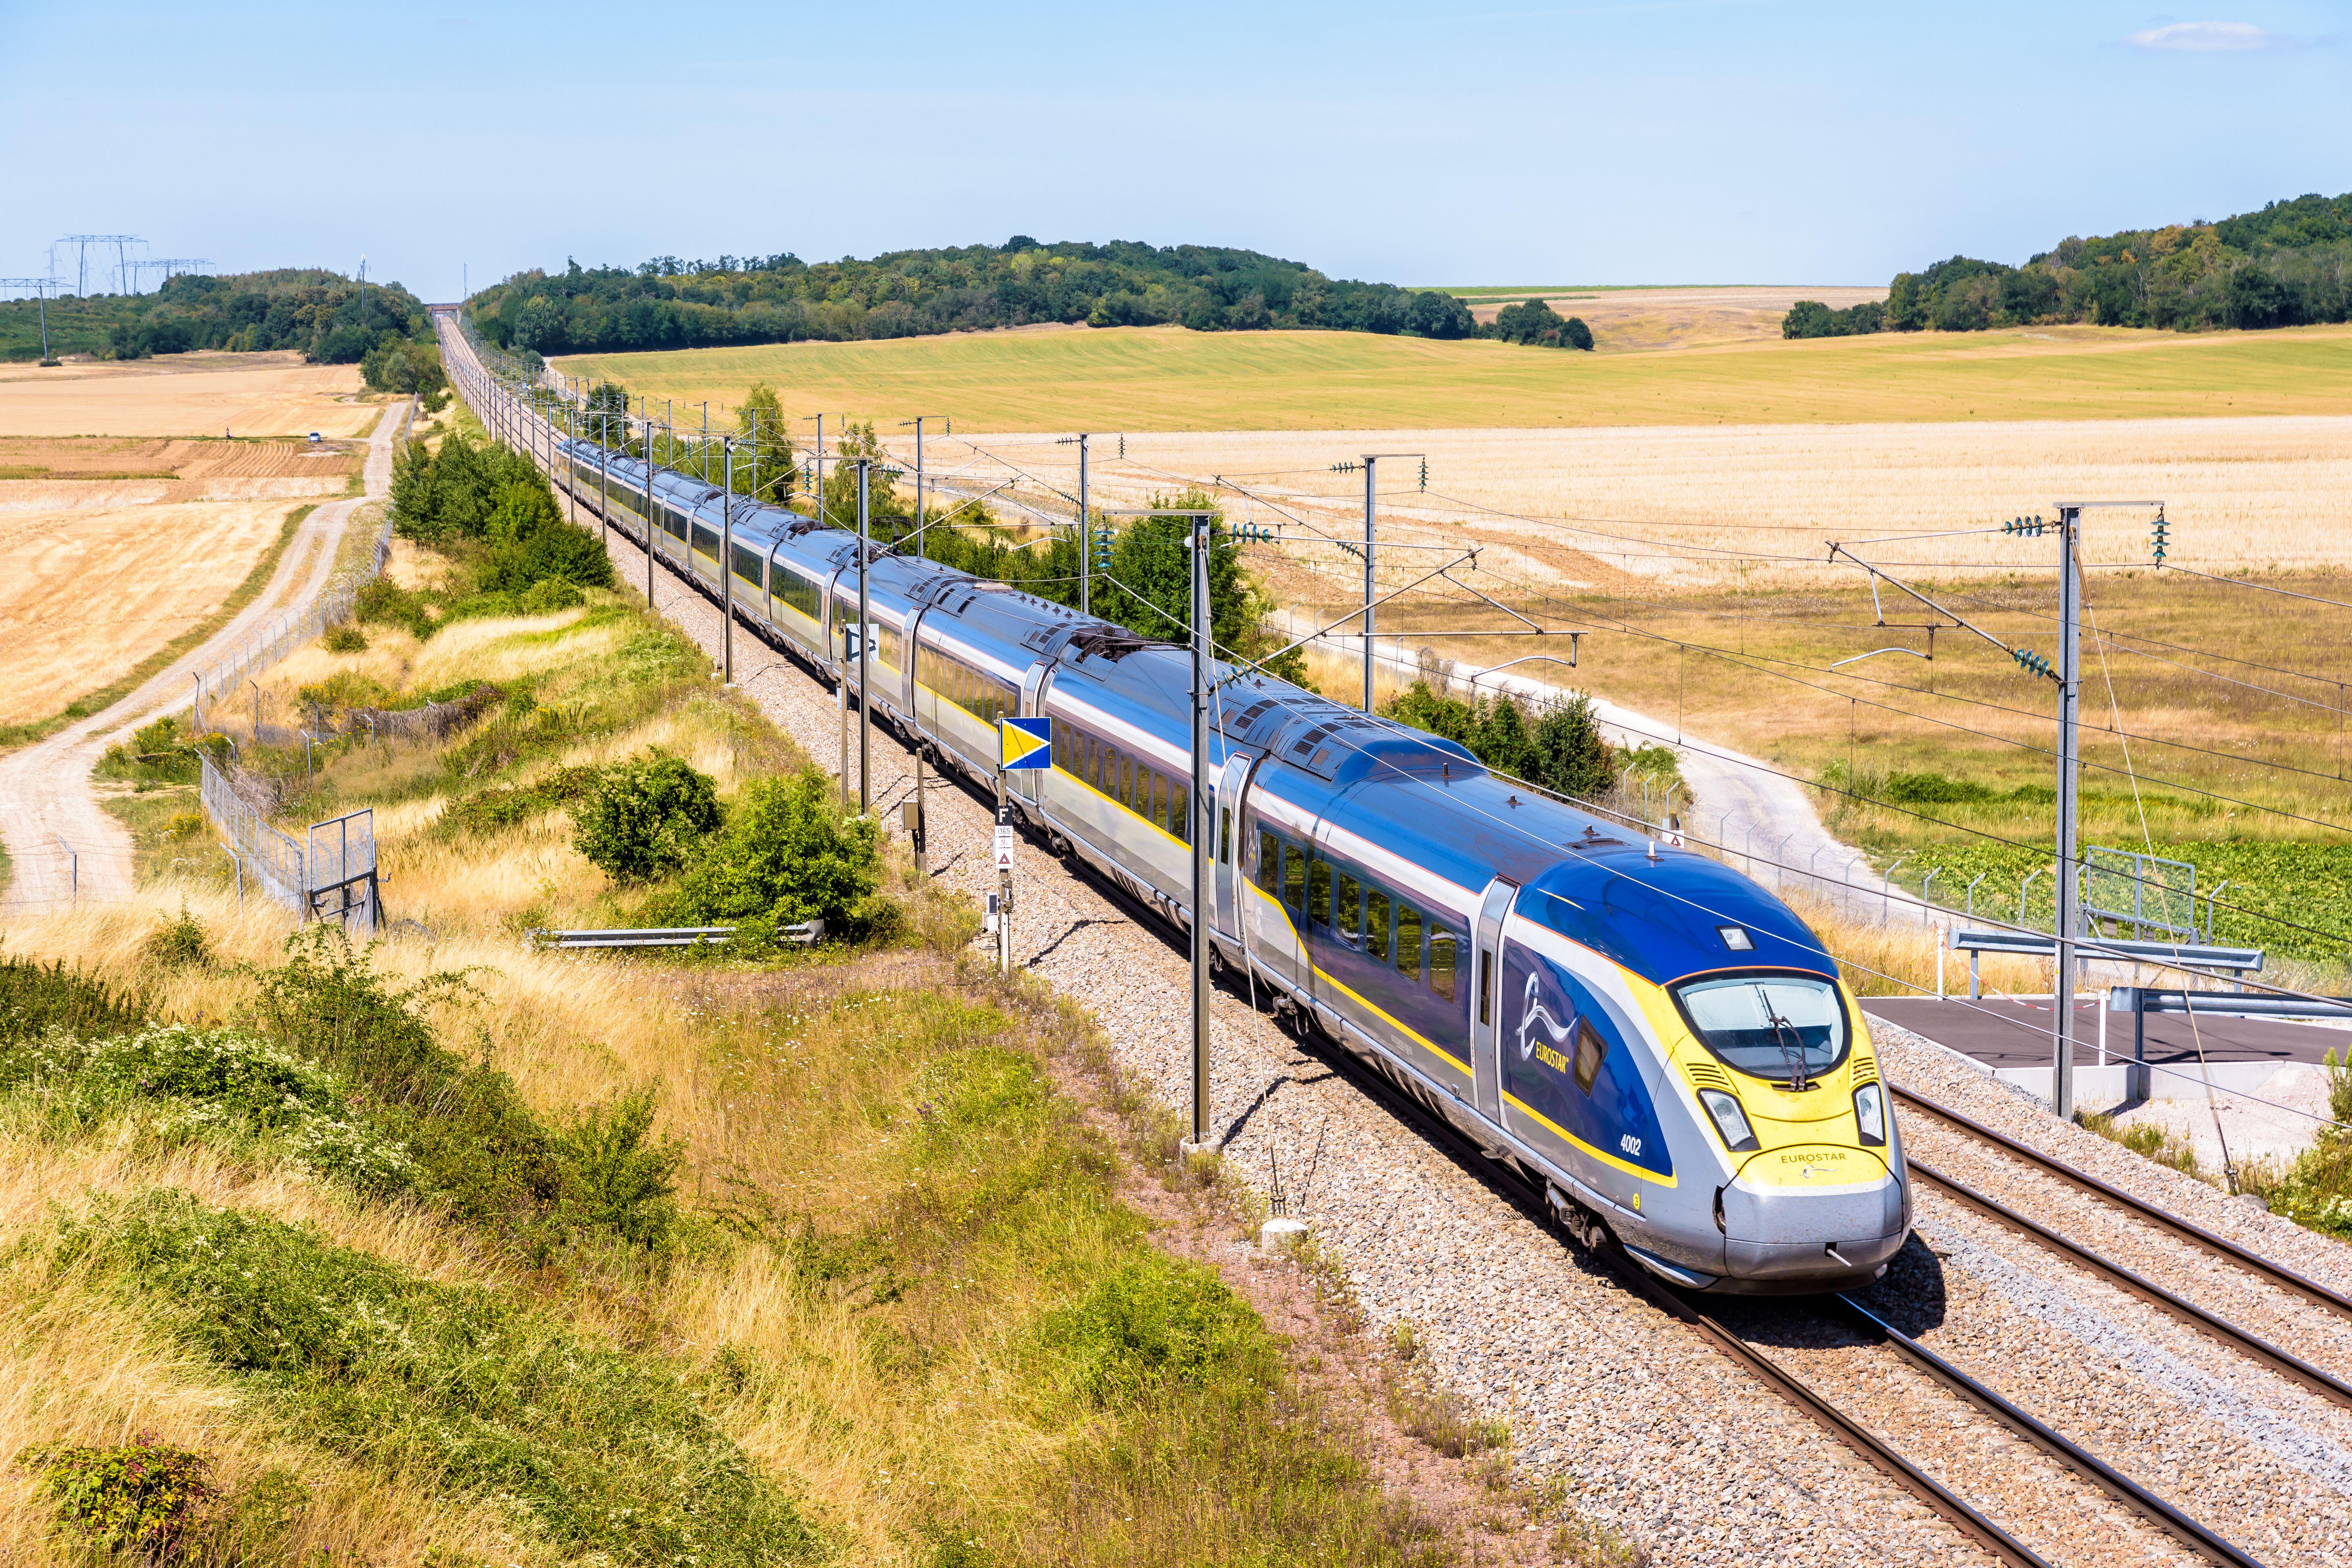 Eurostar passengers will be able to exchange their tickets for free